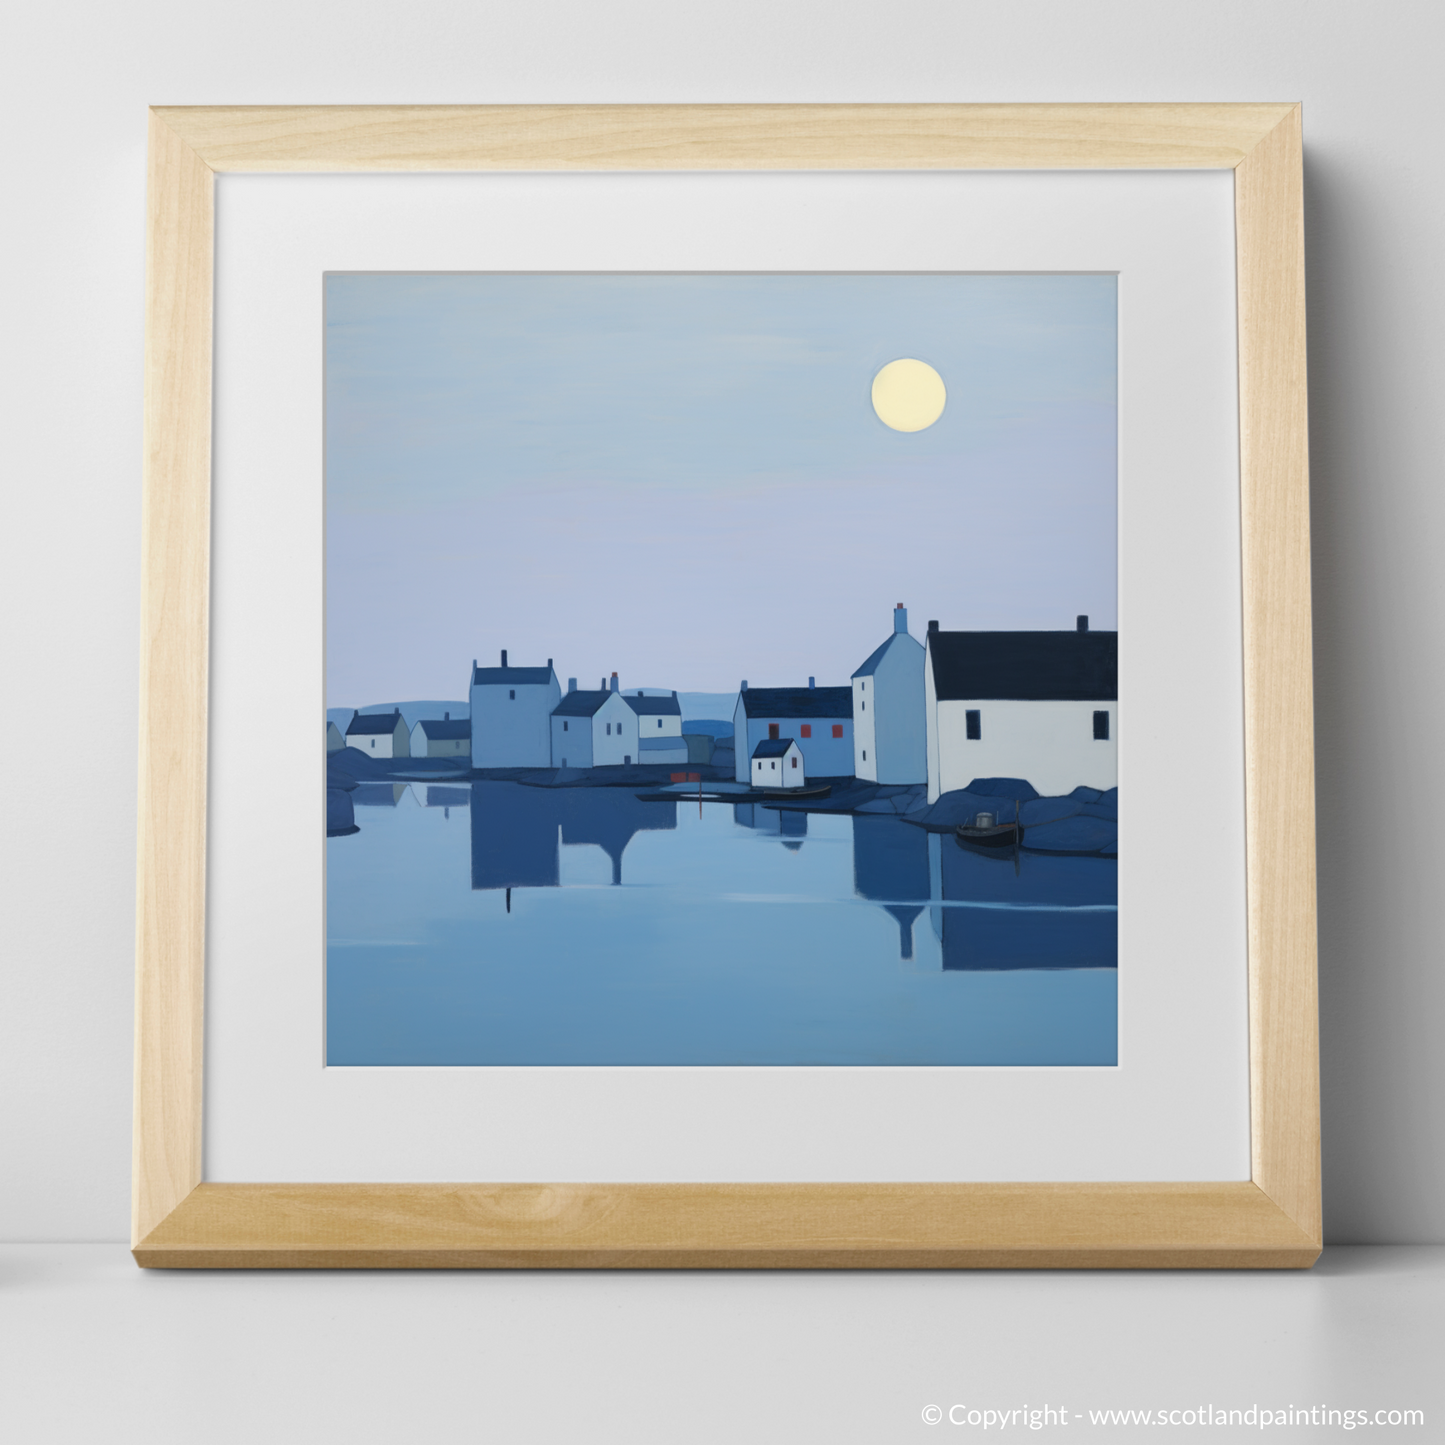 Dusk at Portnahaven Harbour: An Abstract Encounter